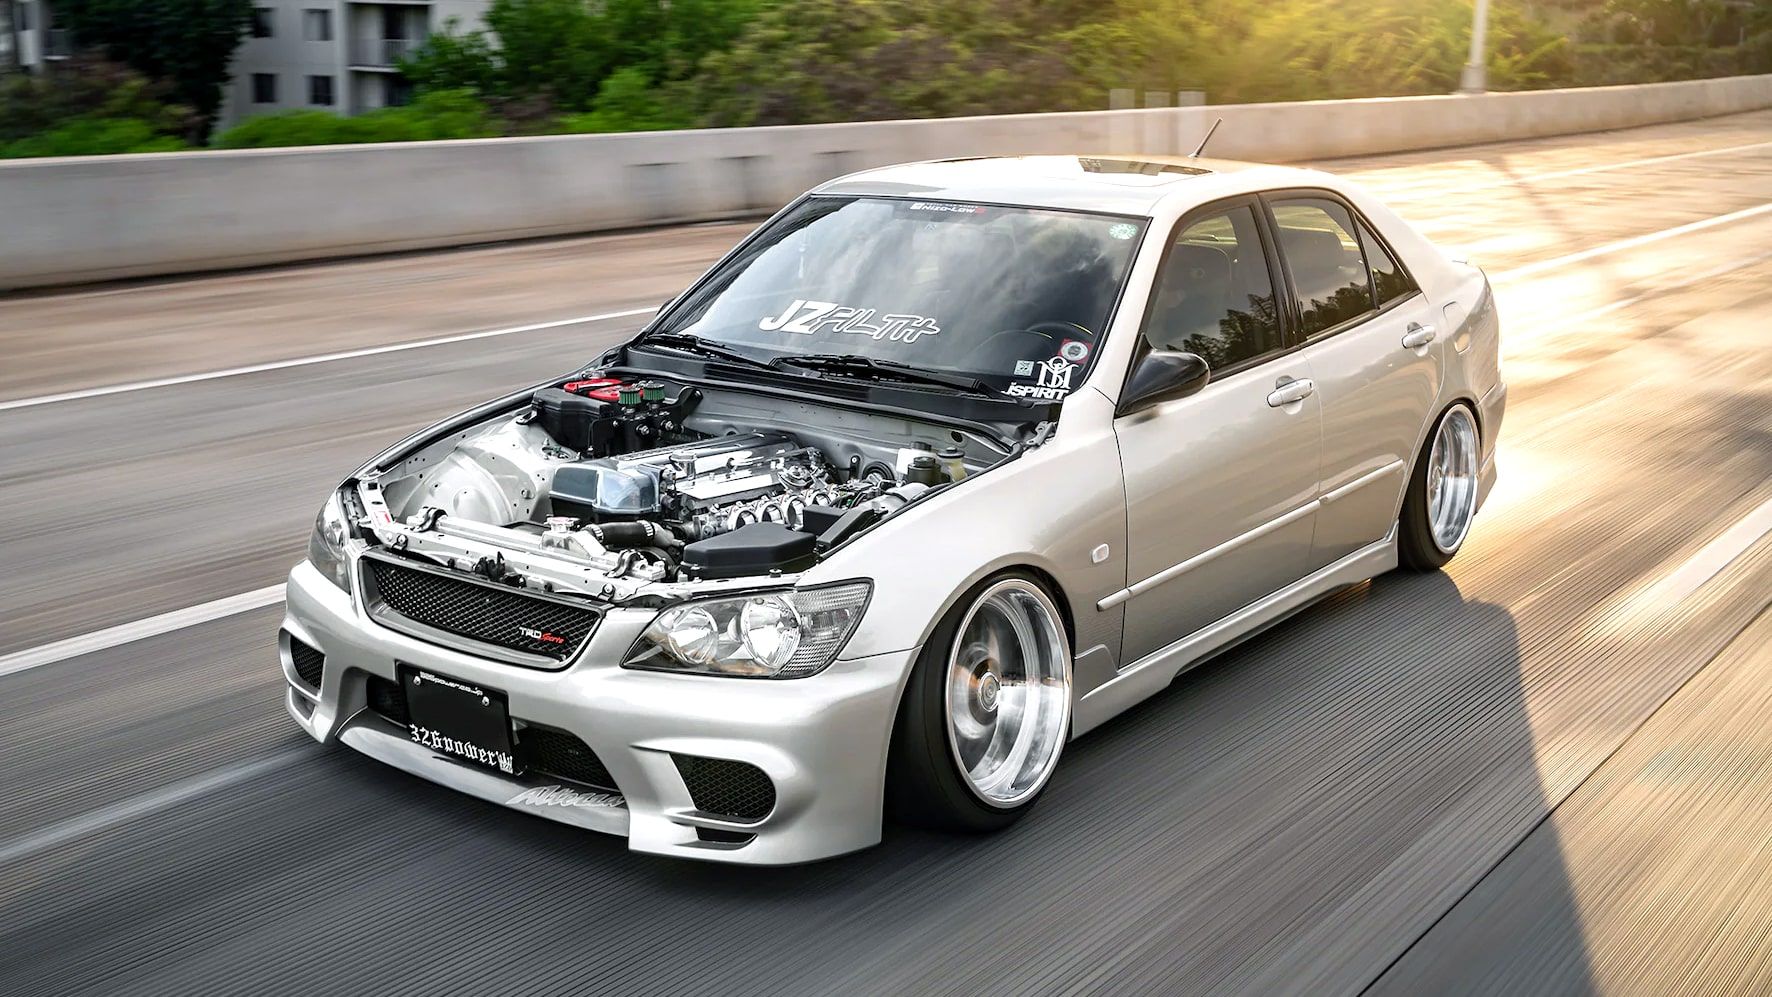 The Ultimate Guide to Modifying Your Car: From Aesthetics to Performance Upgrades